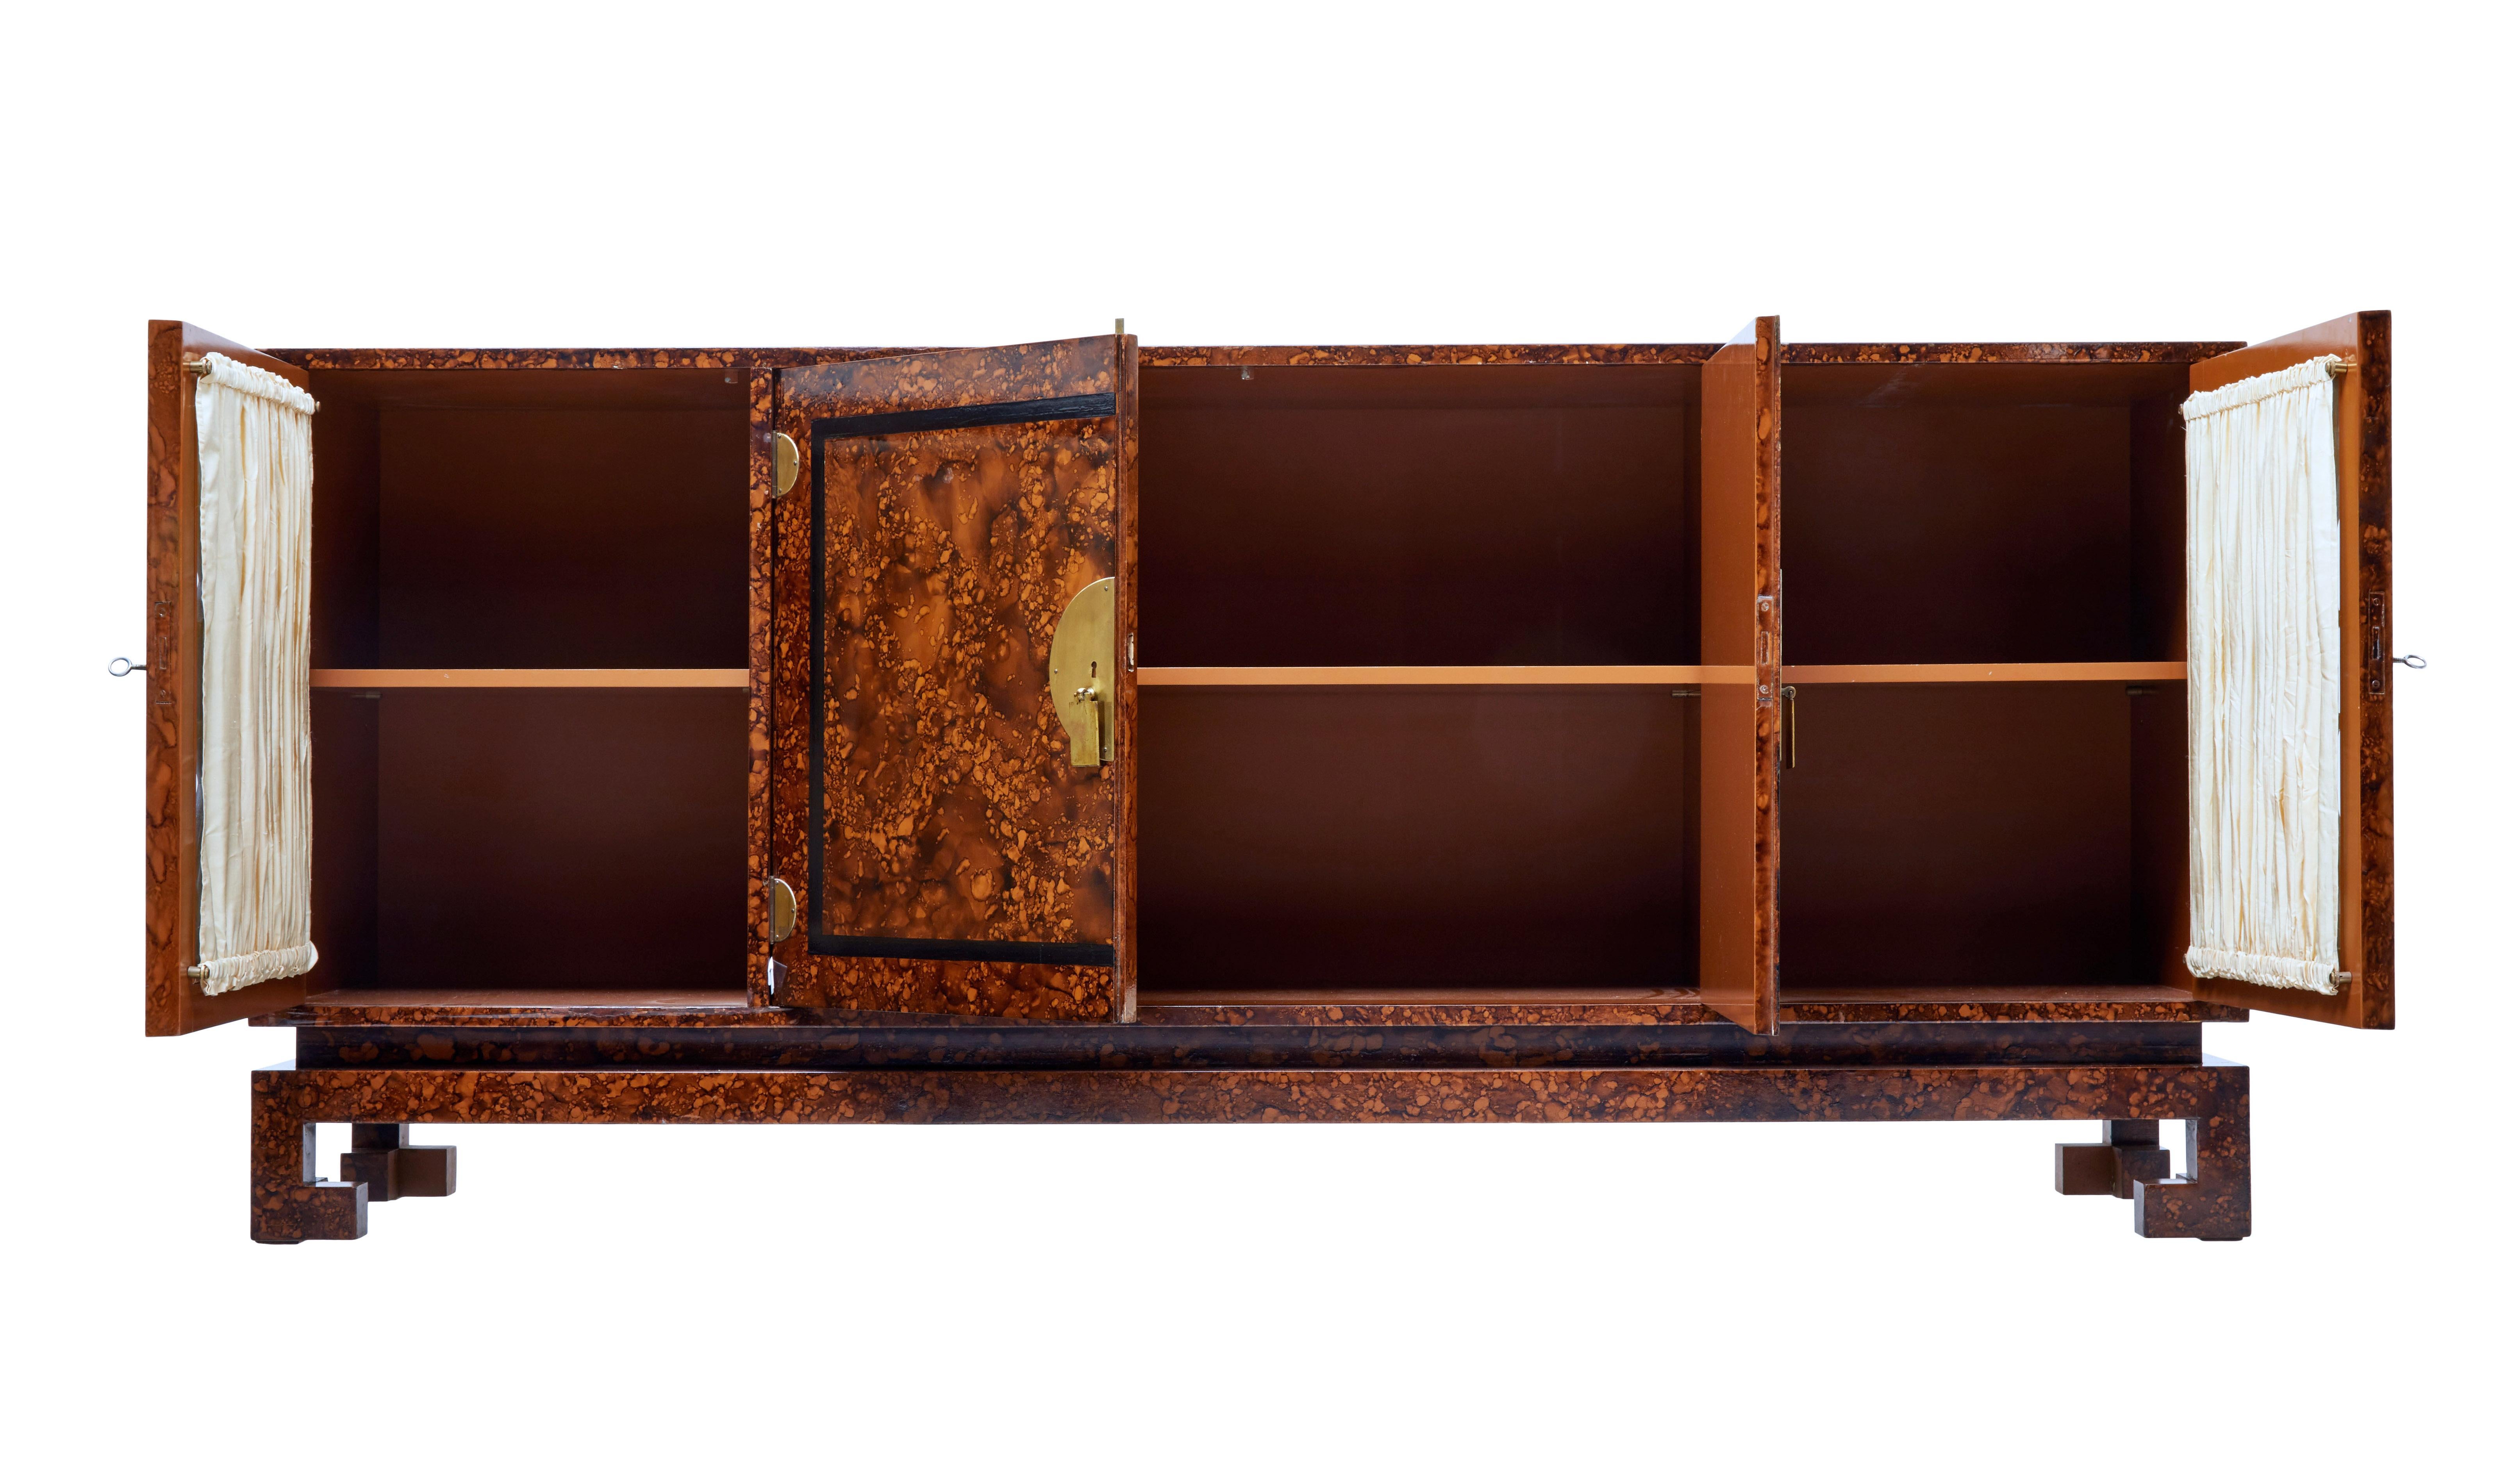 Exotic burr veneered sideboard in the Art Deco style, with strong Chinese influences.

Four-door sideboard with a central double door cupboard containing a single shelf, flanked either by a single door cupboard containing a shelf. Black fret work